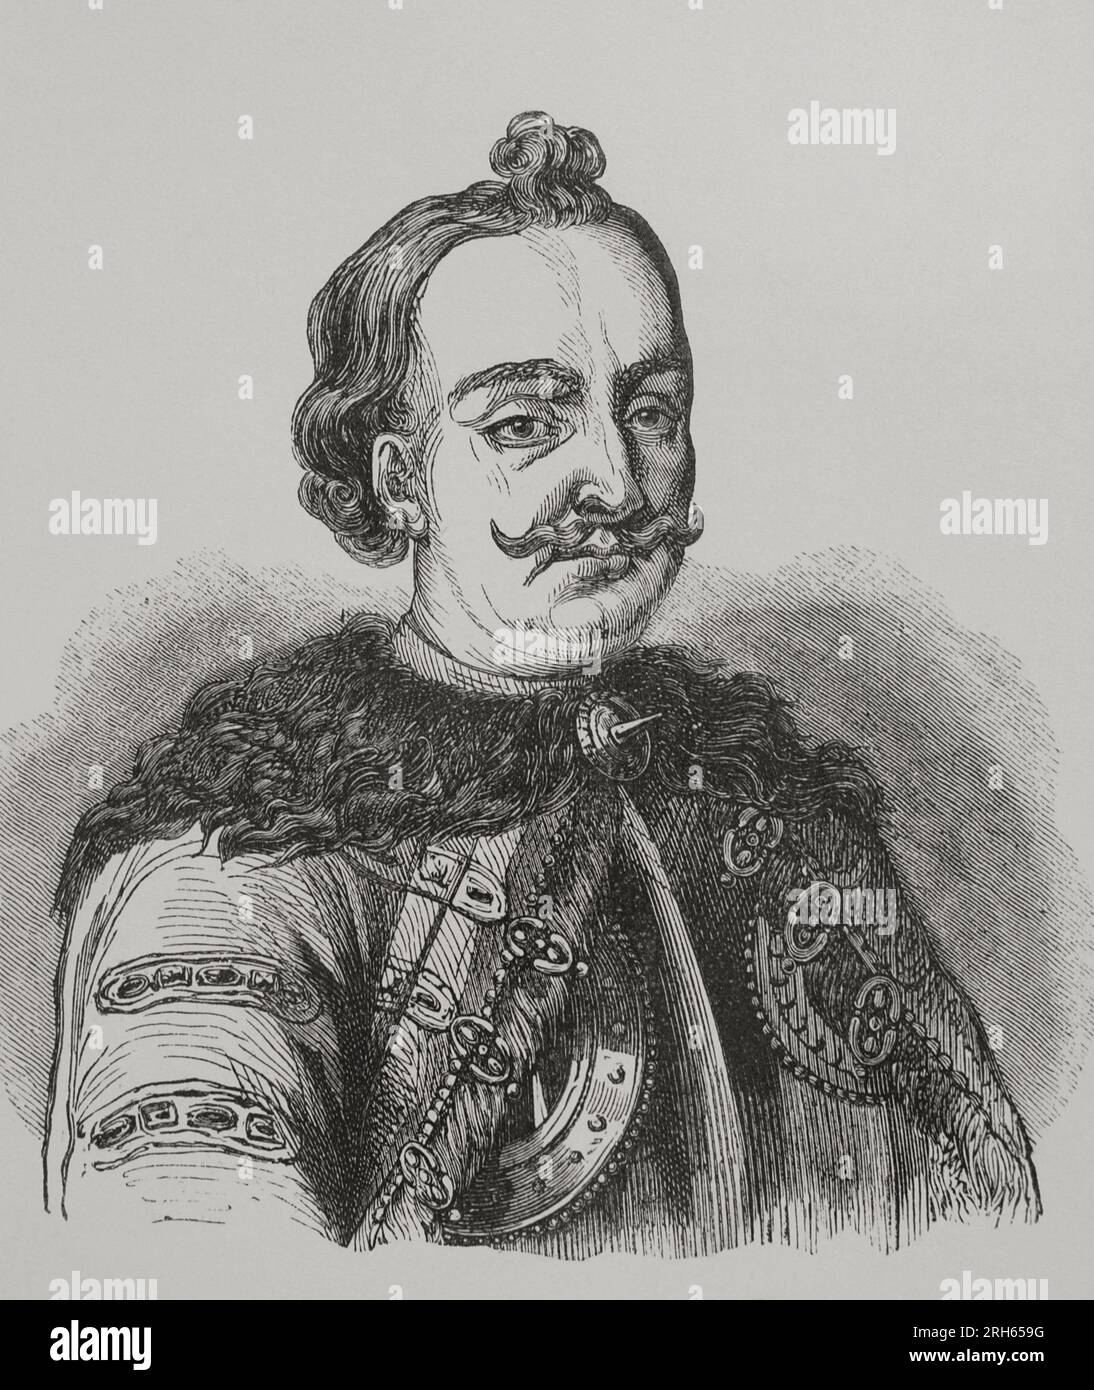 Imre Thokoly (1657-1705). Hungarian nobleman who for a short period founded the Principality of Upper Hungary (1682-1685). In 1690 he became Prince of Transylvania. Portrait. Engraving. 'Los Heroes y las Grandezas de la Tierra' (The Heroes and the Grandeurs of the Earth). Volume VI. 1856. Stock Photo